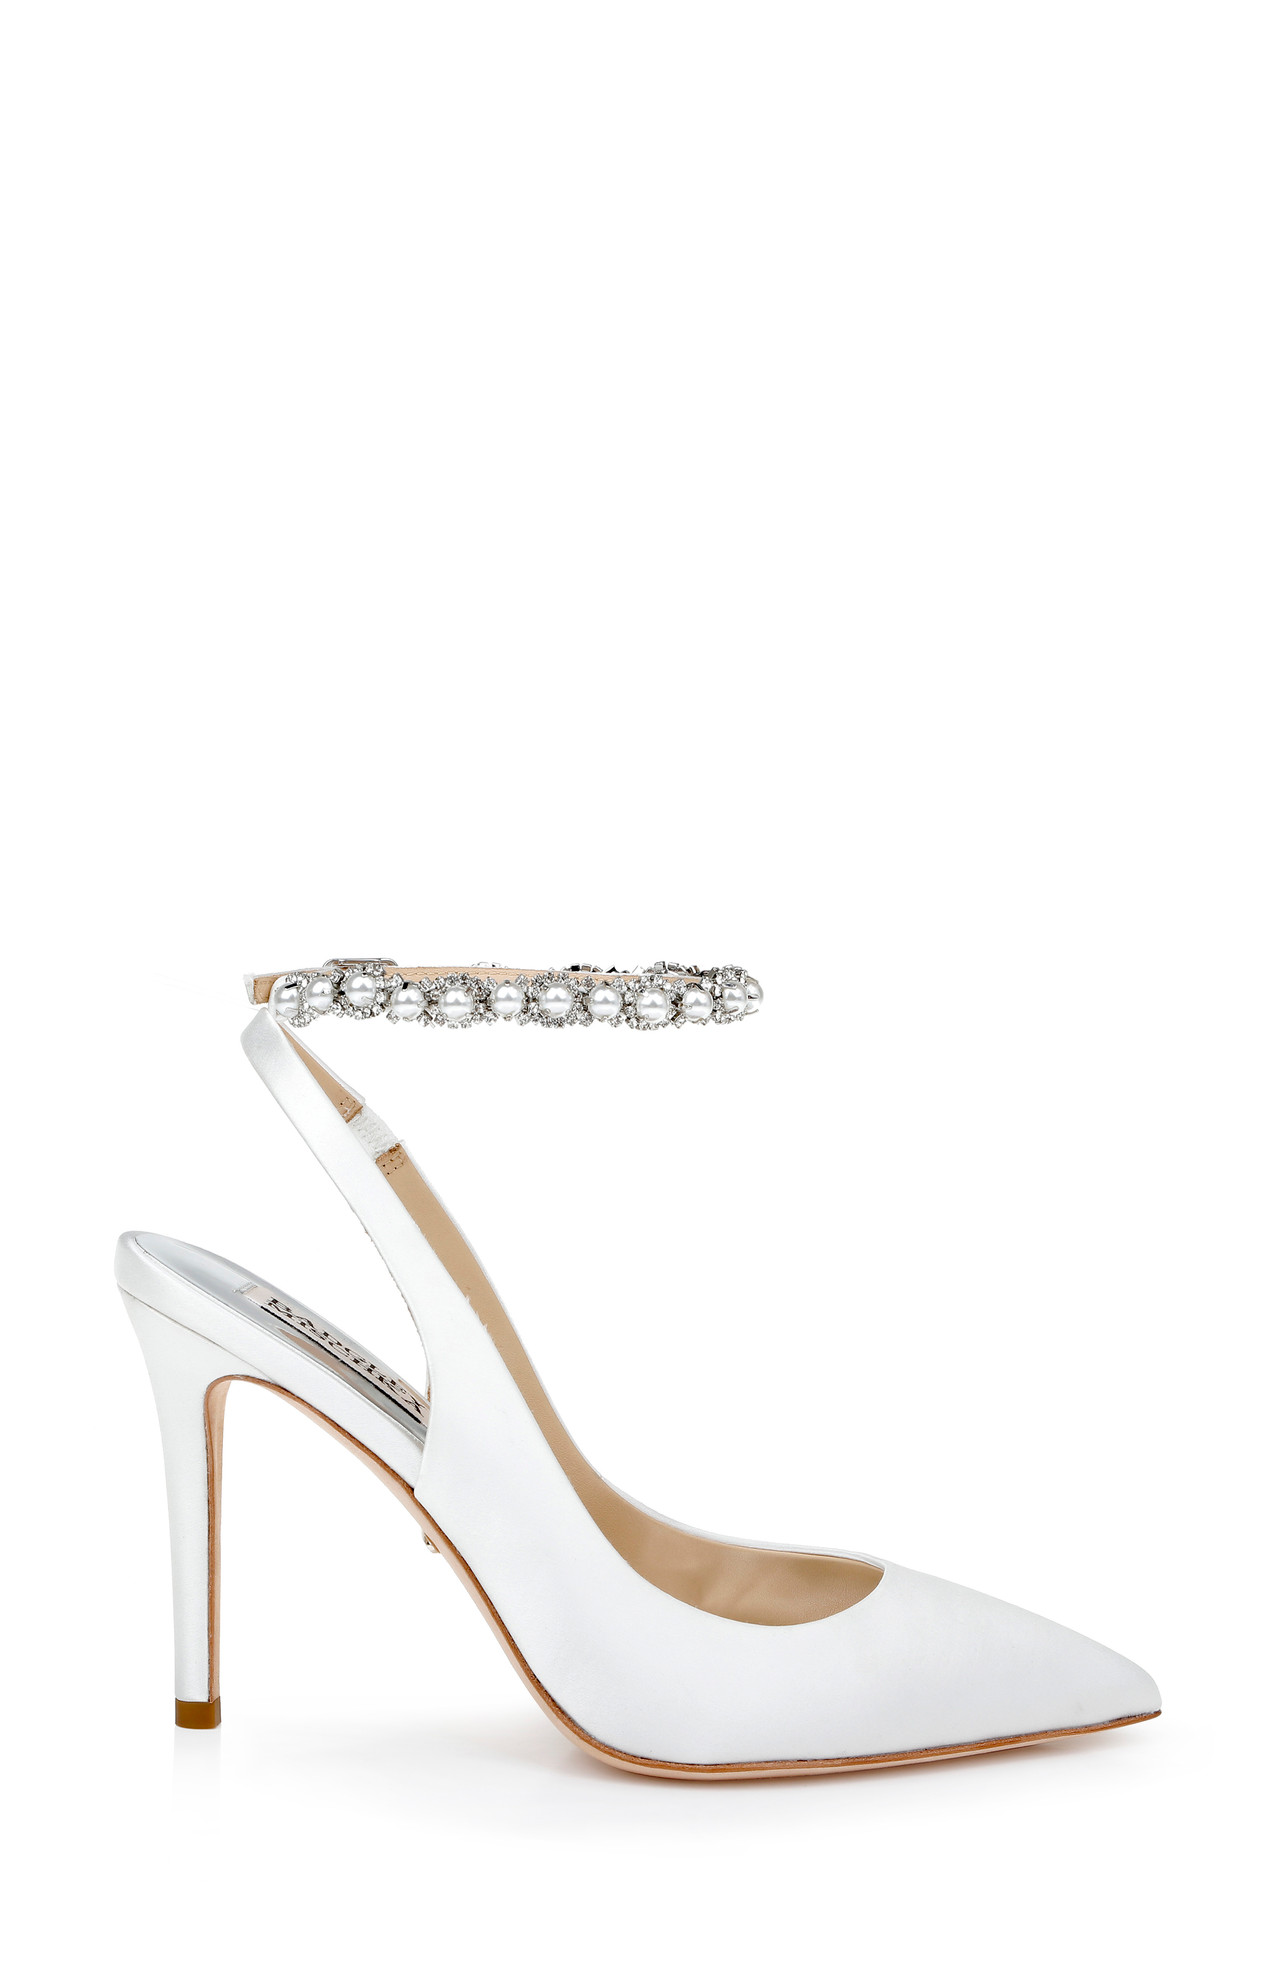 Kris Satin and Pearl Pointed Stiletto by Badgley Mishcka